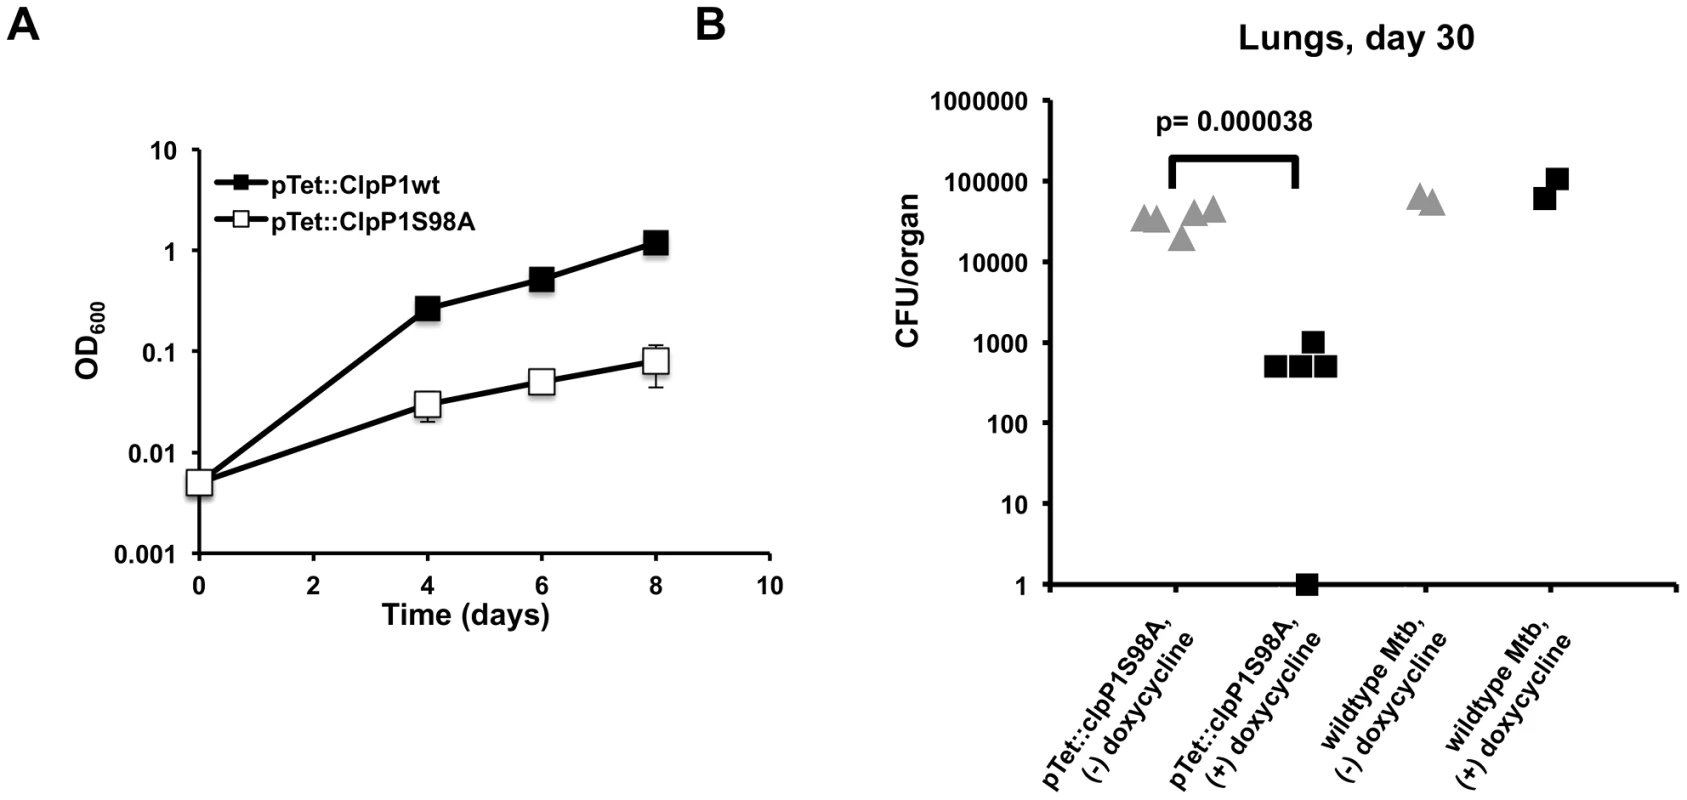 A catalytically inactive ClpP allele inhibit Mtb growth <i>in vitro and during infection</i>.